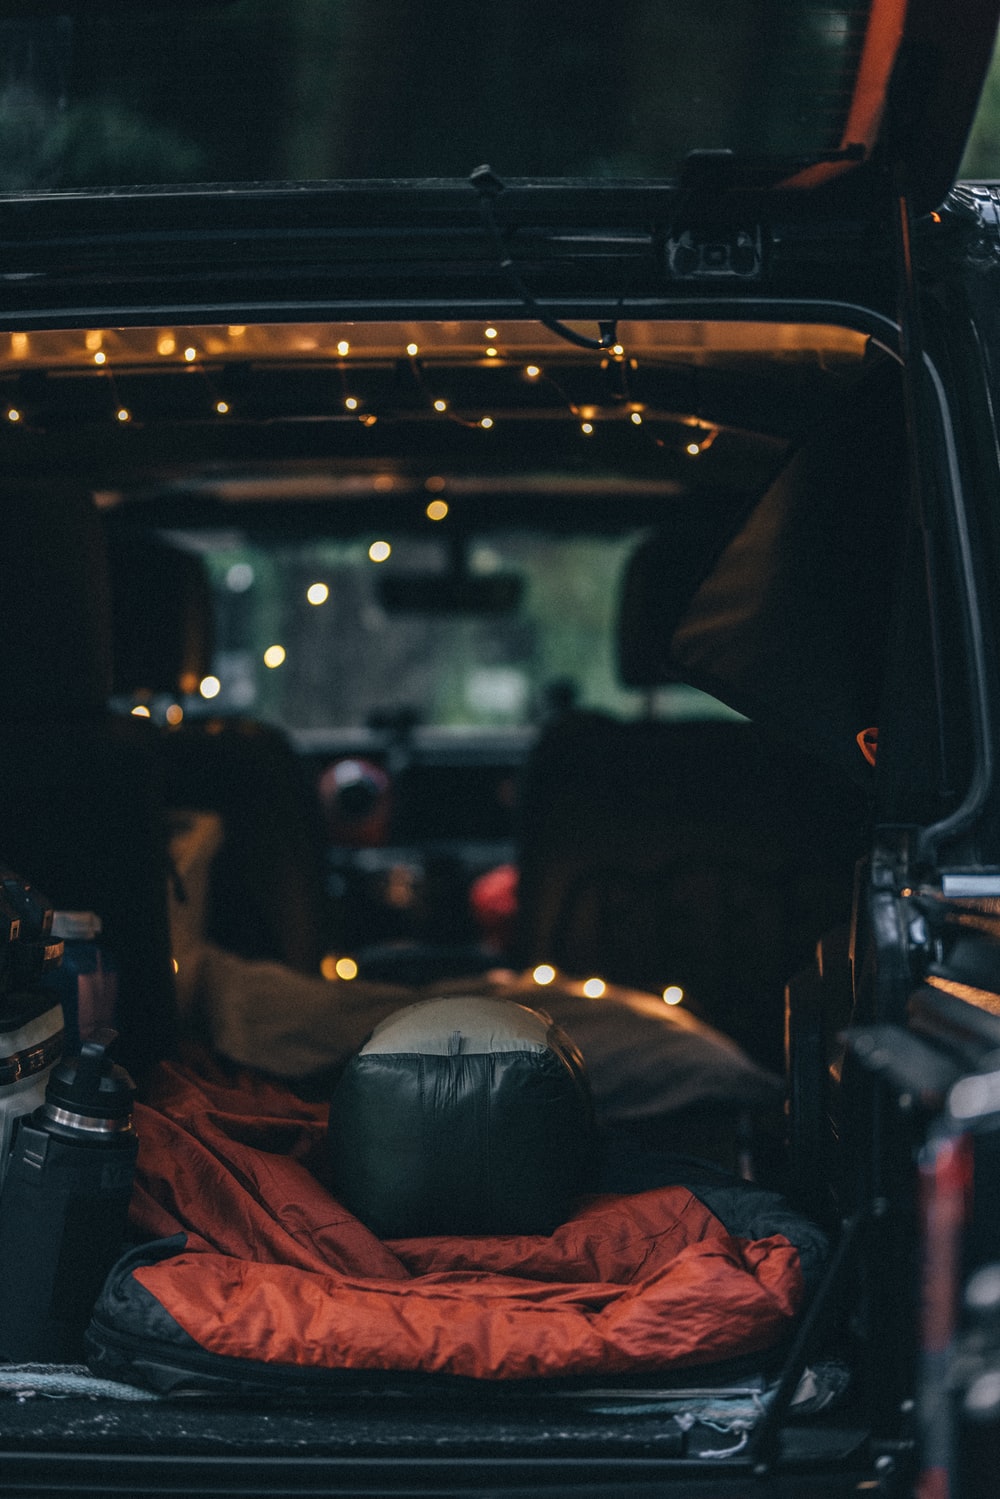 Car Camping Picture. Download Free Image